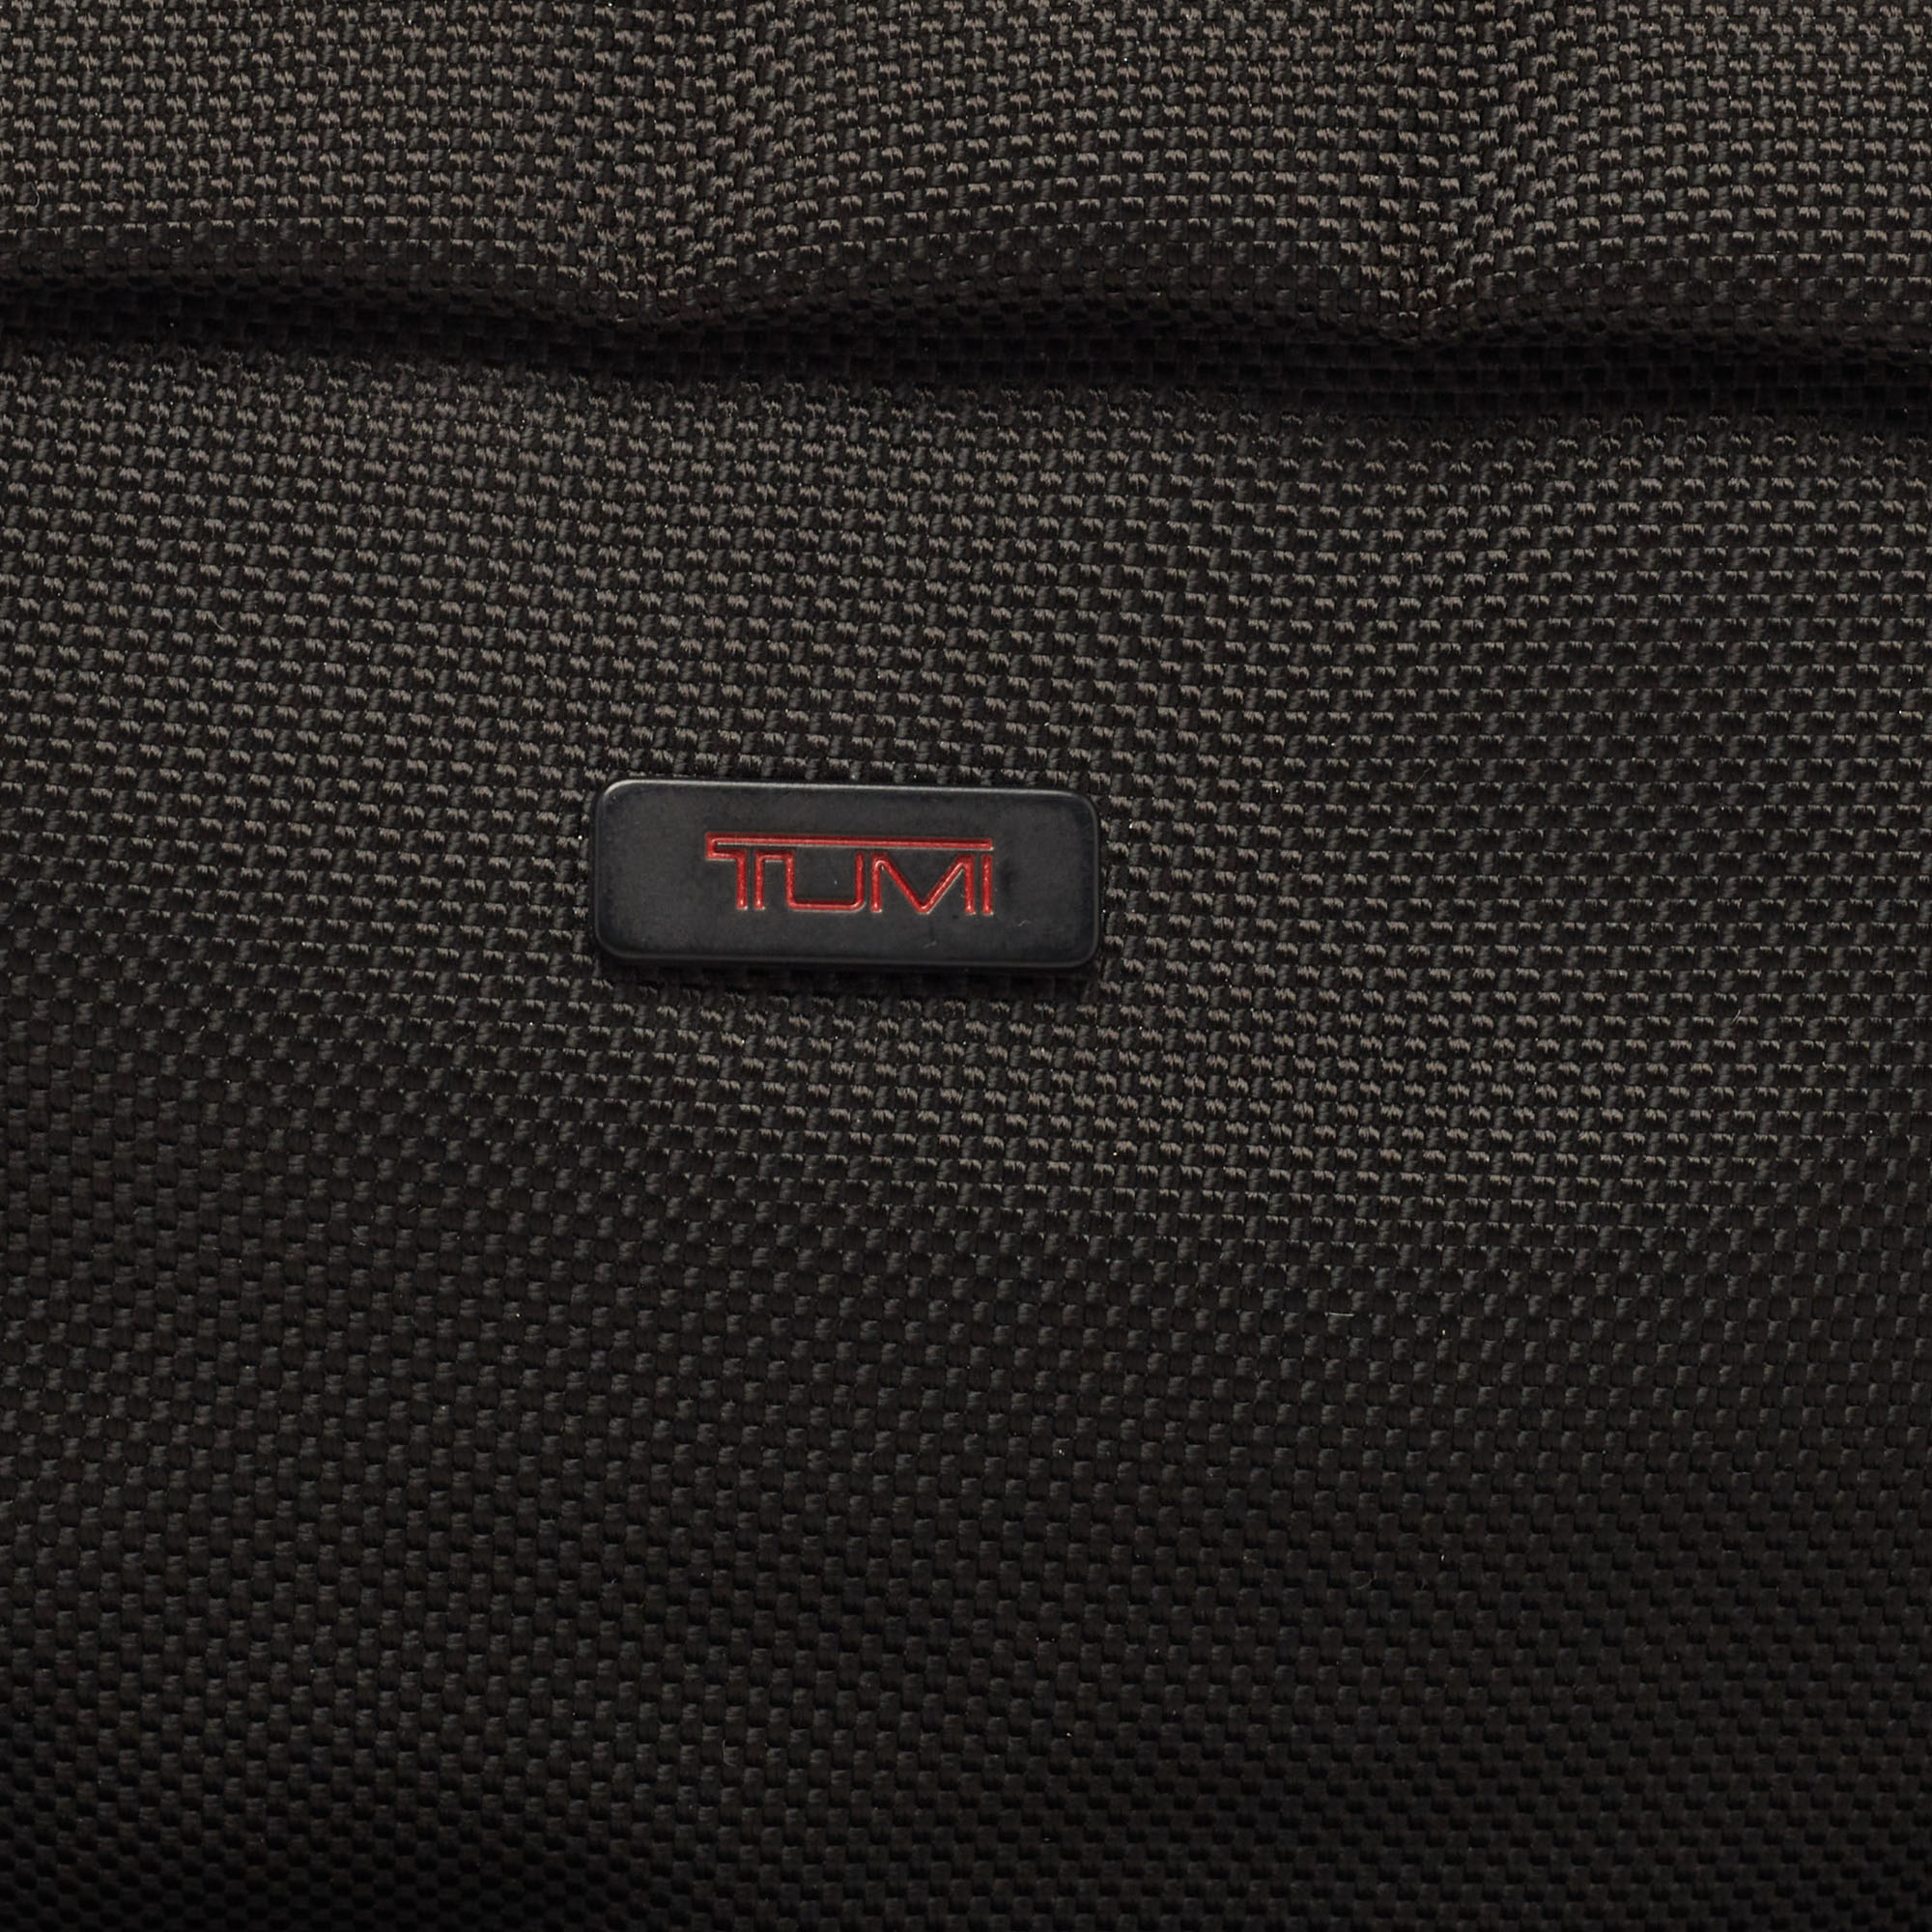 Tumi Black Nylon And Leather Zip Pouch